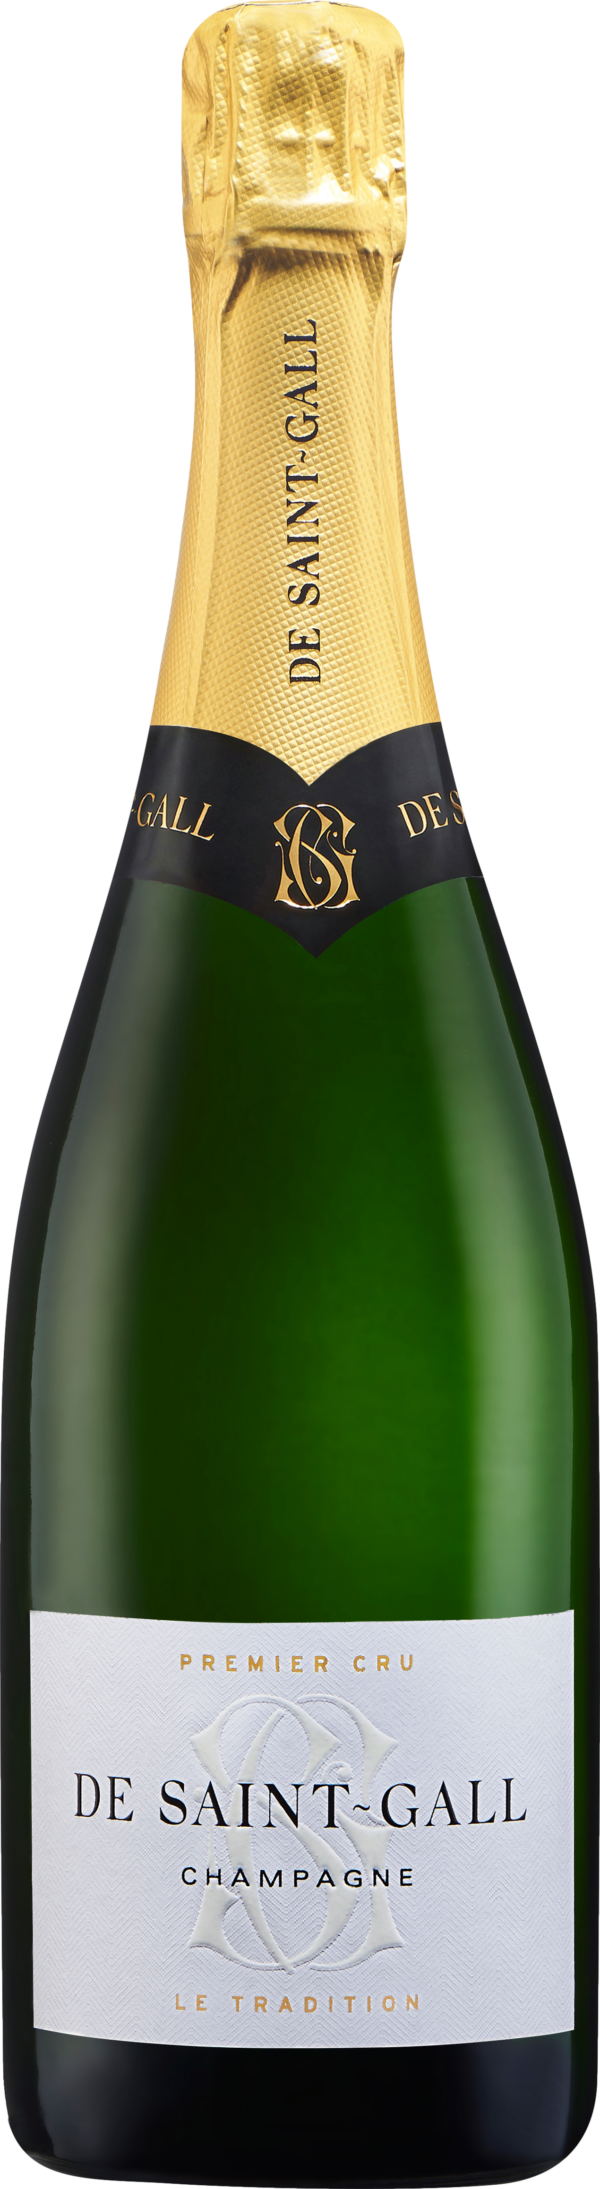 Product image of Champagne De Saint Gall Tradition Premier Cru from 8wines